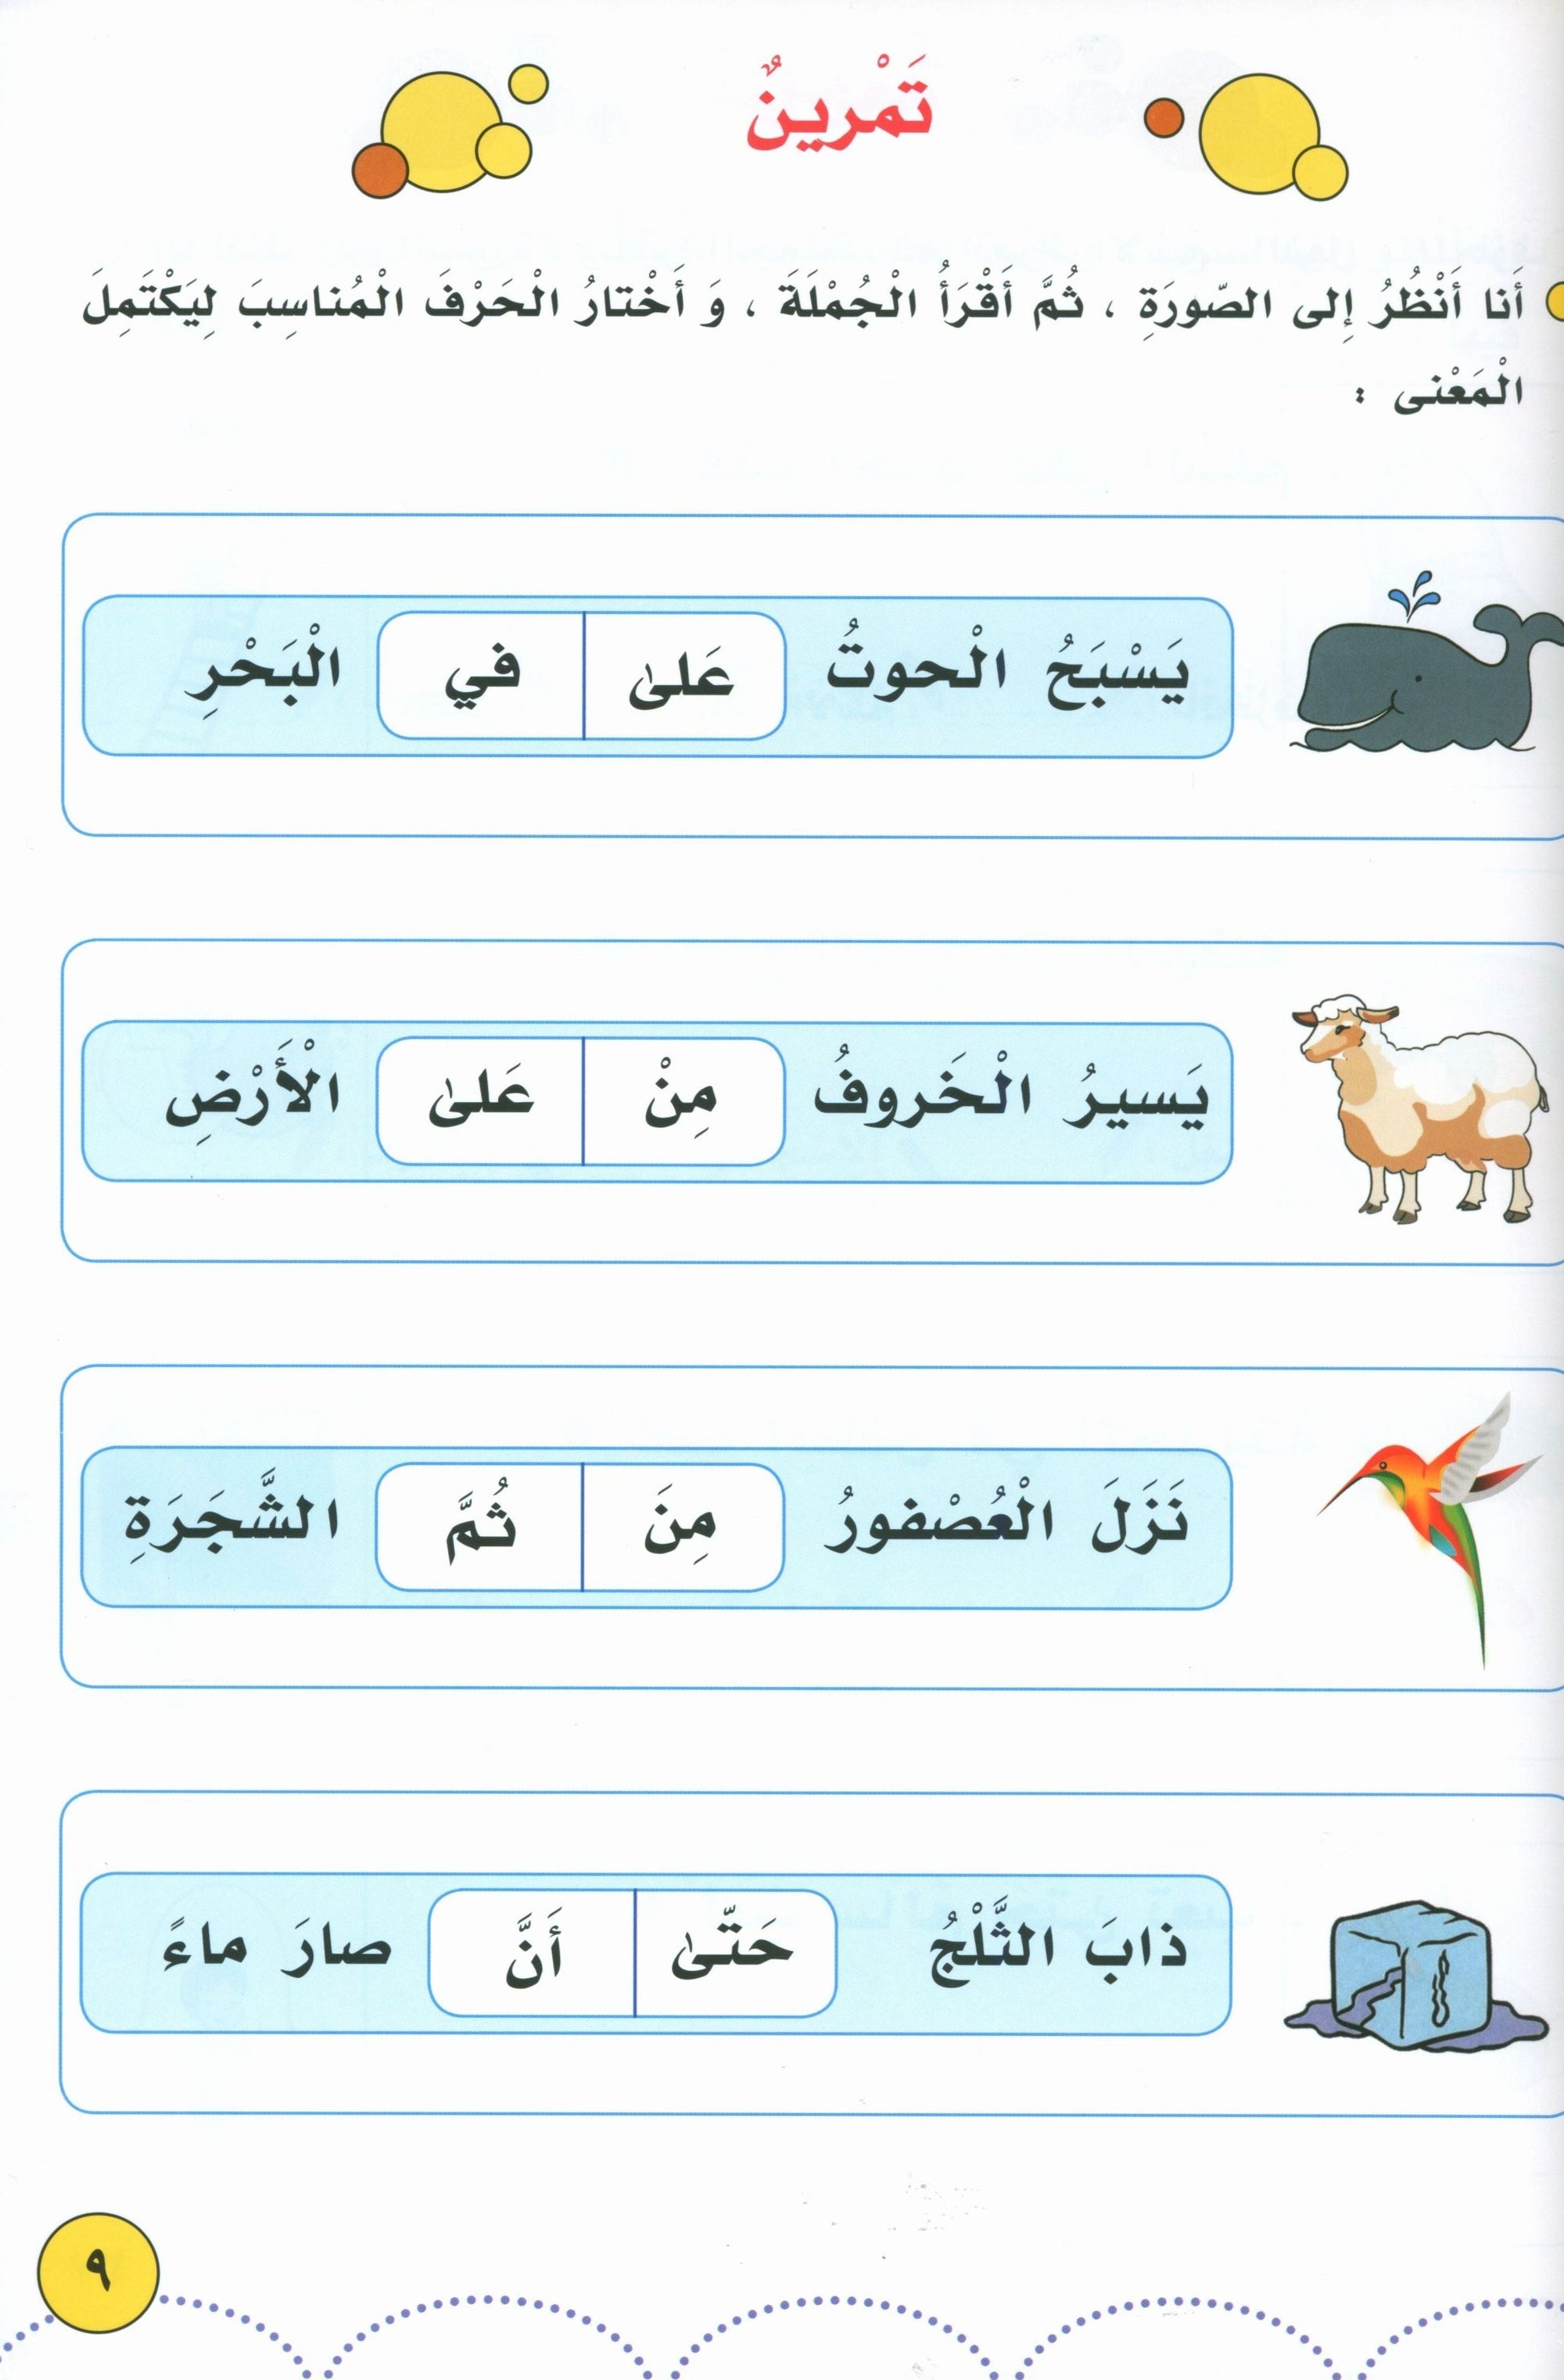 My Language Is My Identity Part 1 لغتي هويتي